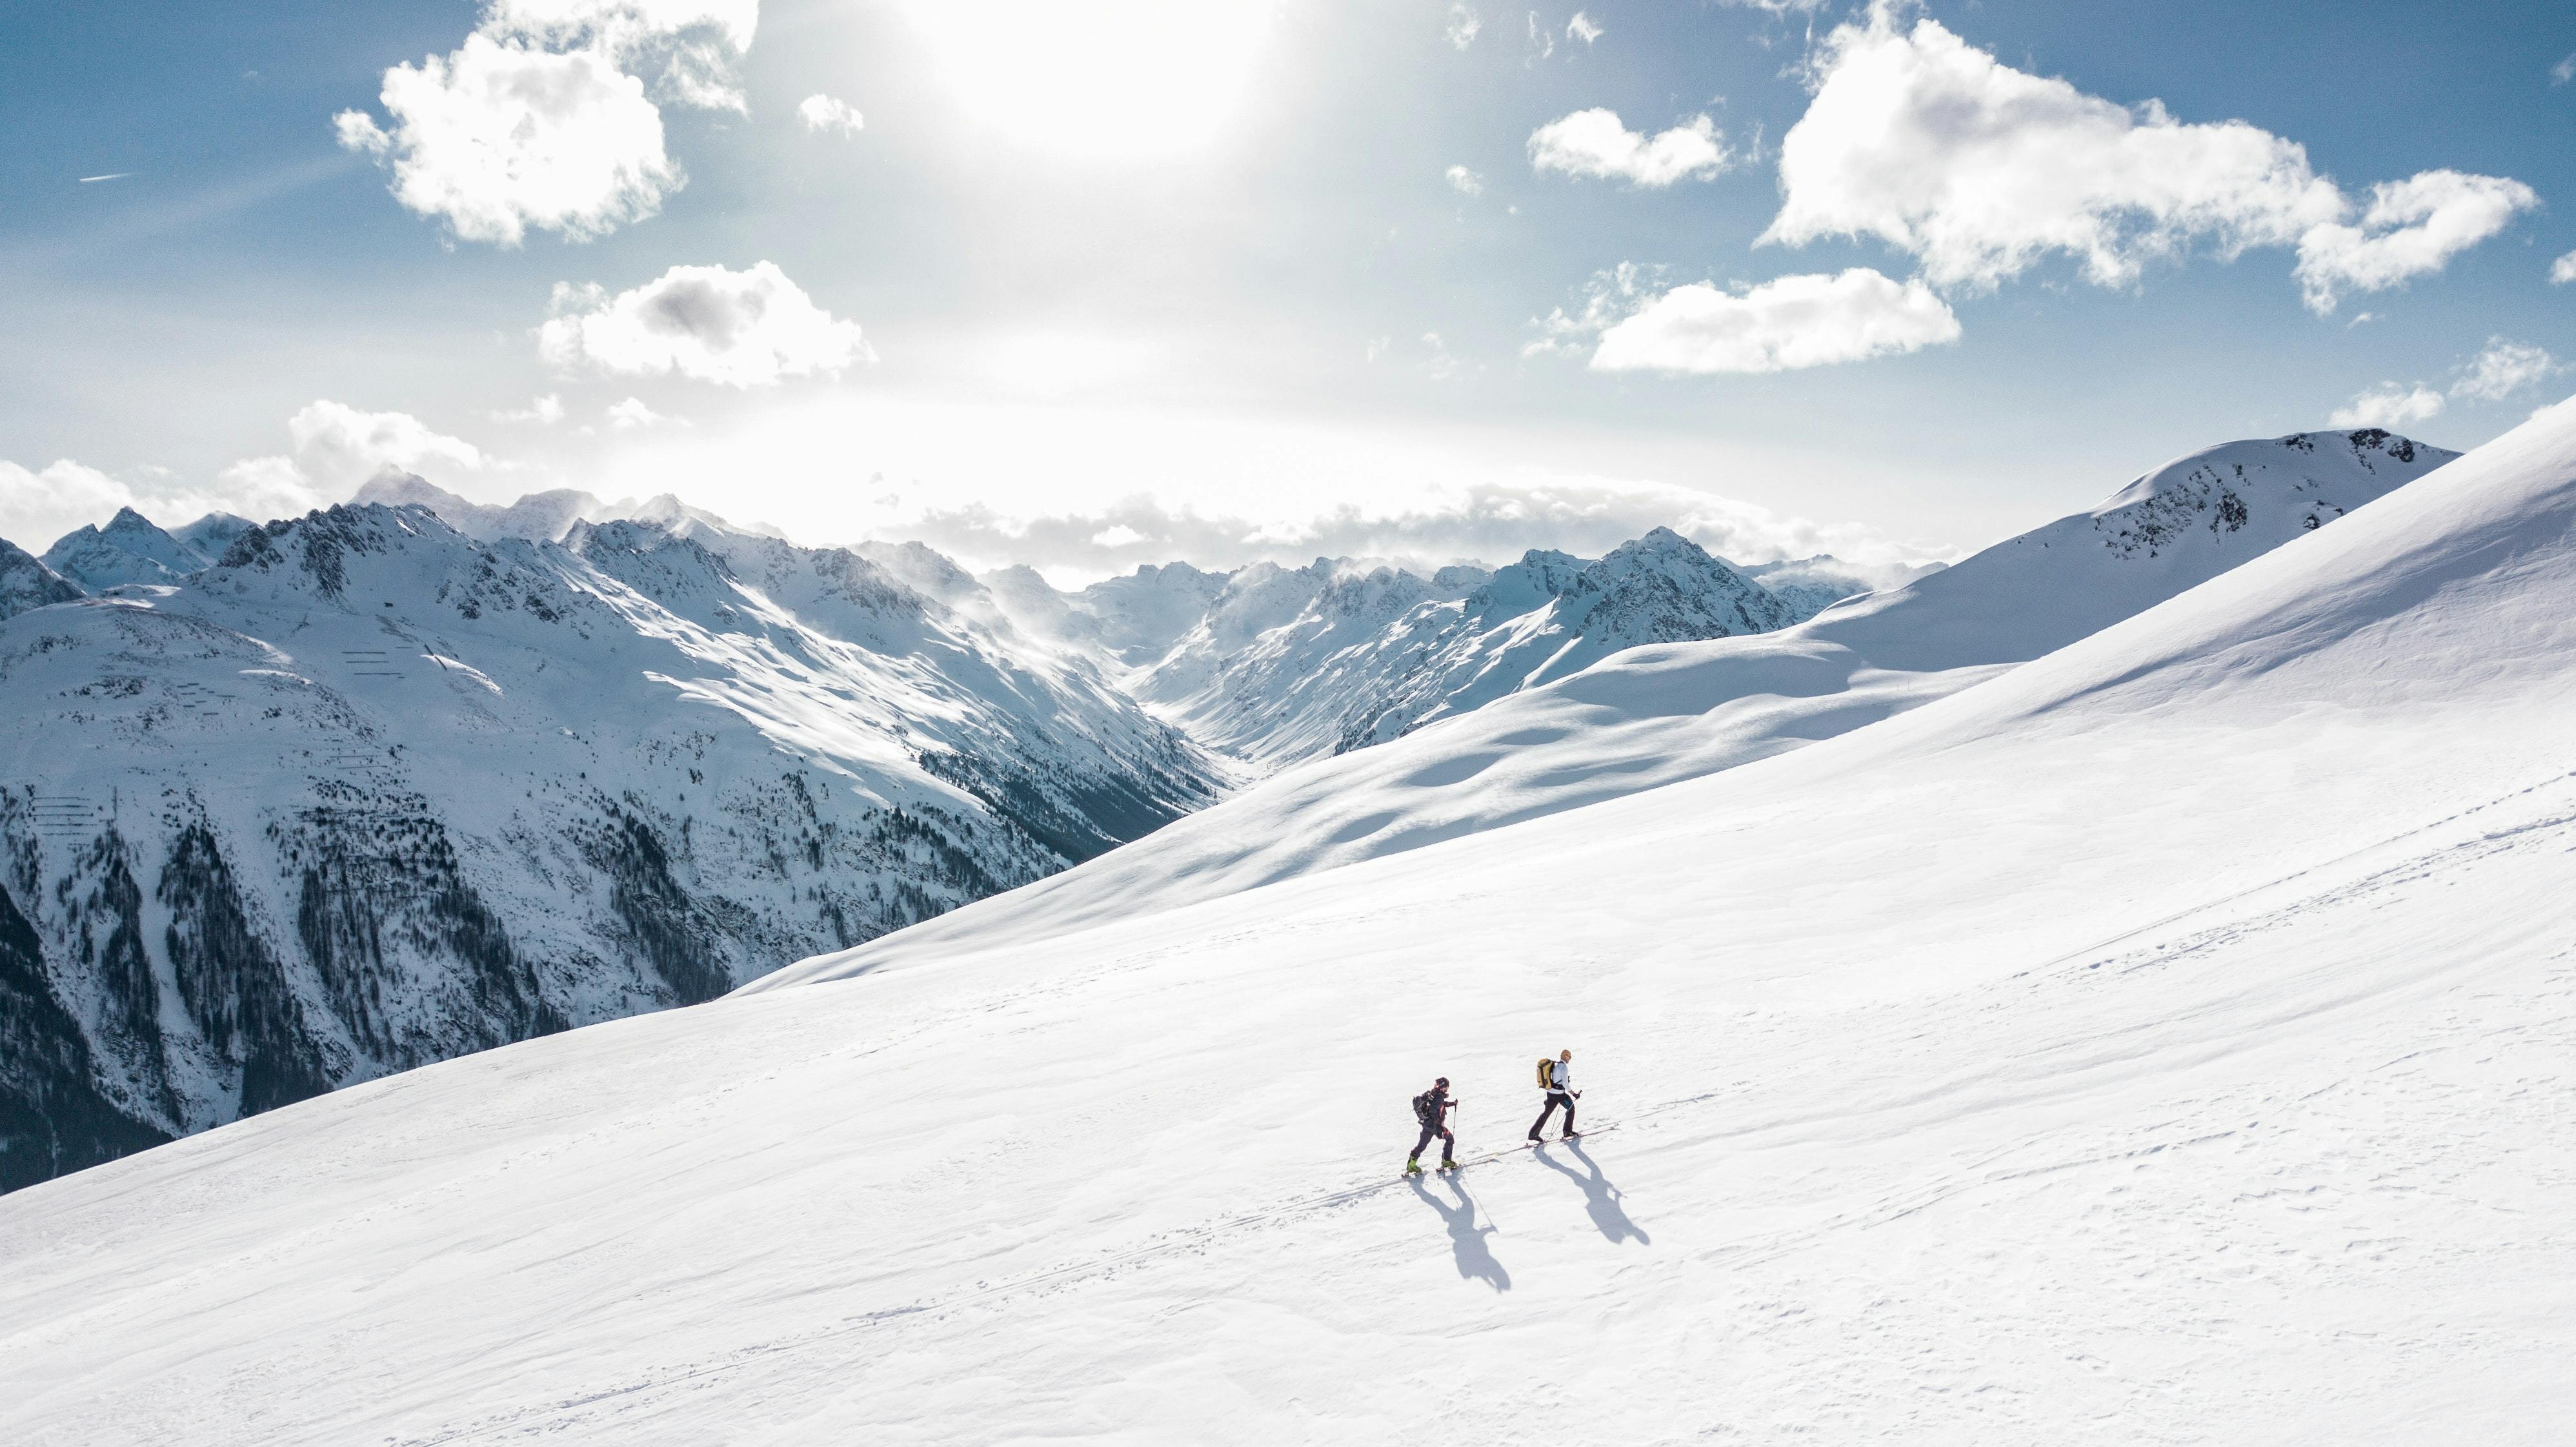 Two skiers walk uphill. The photo is taken from far away and there are some peaks in the background. The sun is shining and snow is everywhere.